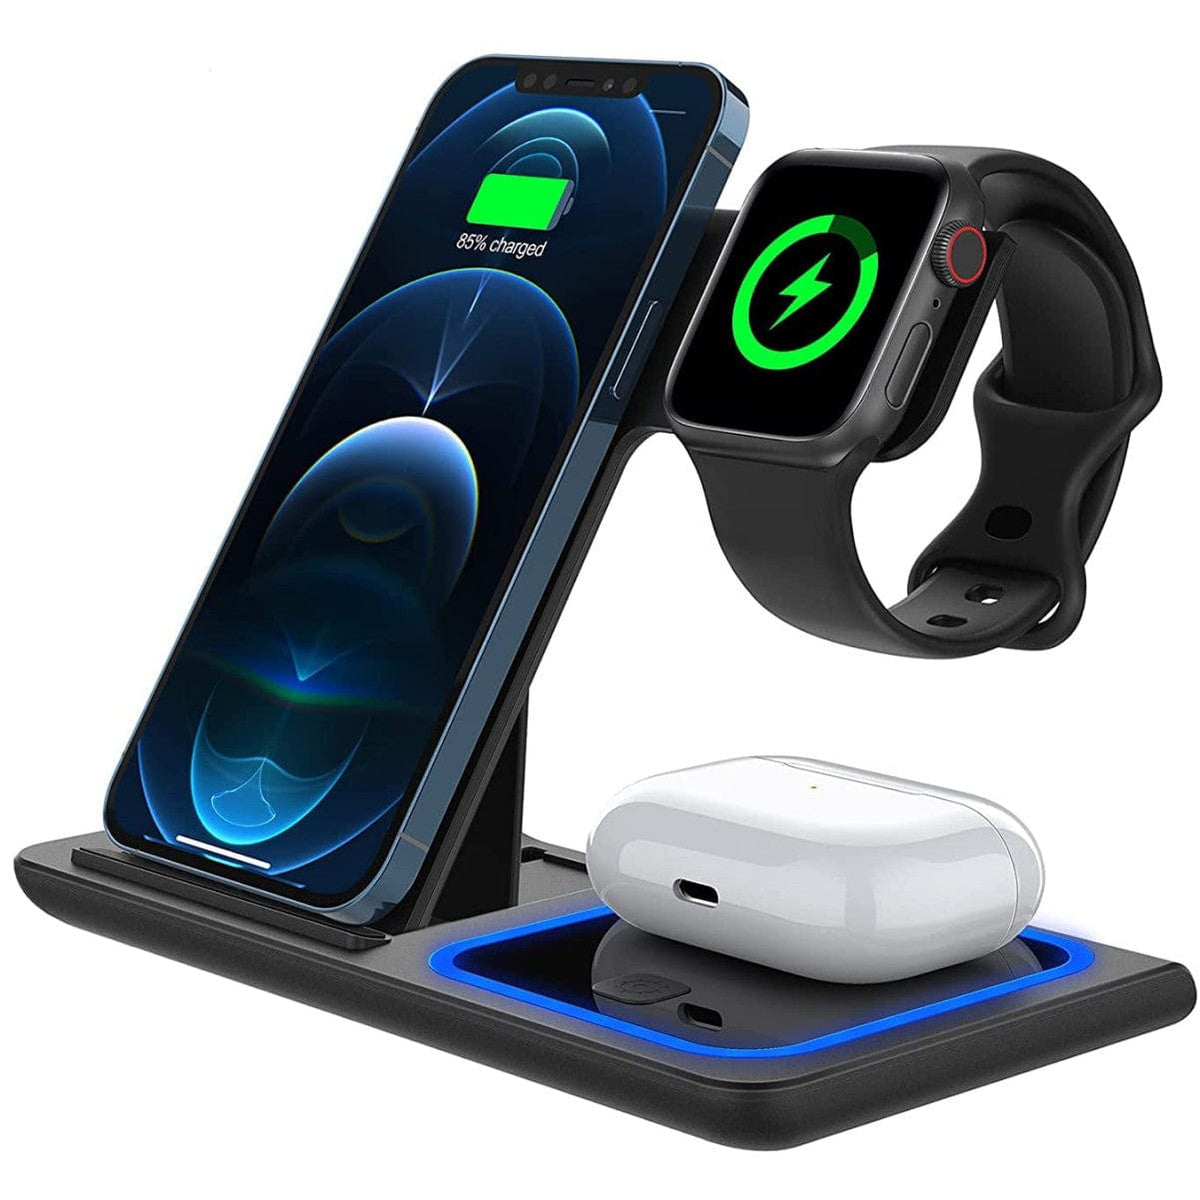 Incarcator Wireless, Statie Incarcare 3 In 1 Qi Fast Charger 15W, Compatibil Cu Apple Watch Toate Airpods Toate Modele de Iphone, Android, Samsung, Huawei, Xiaomi, Negru